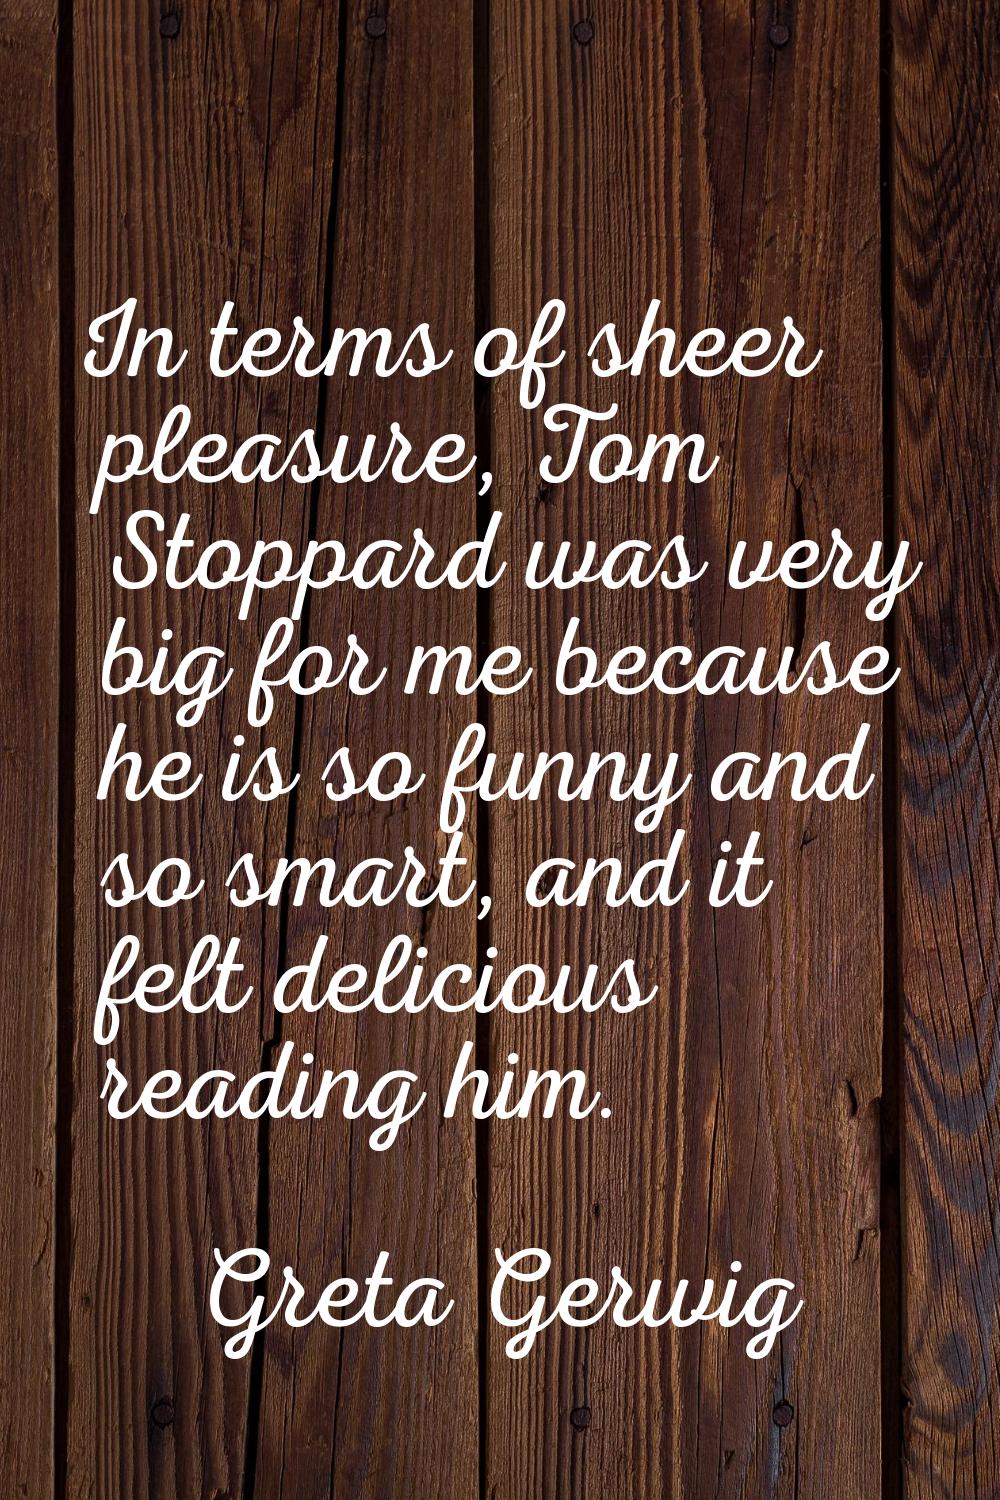 In terms of sheer pleasure, Tom Stoppard was very big for me because he is so funny and so smart, a